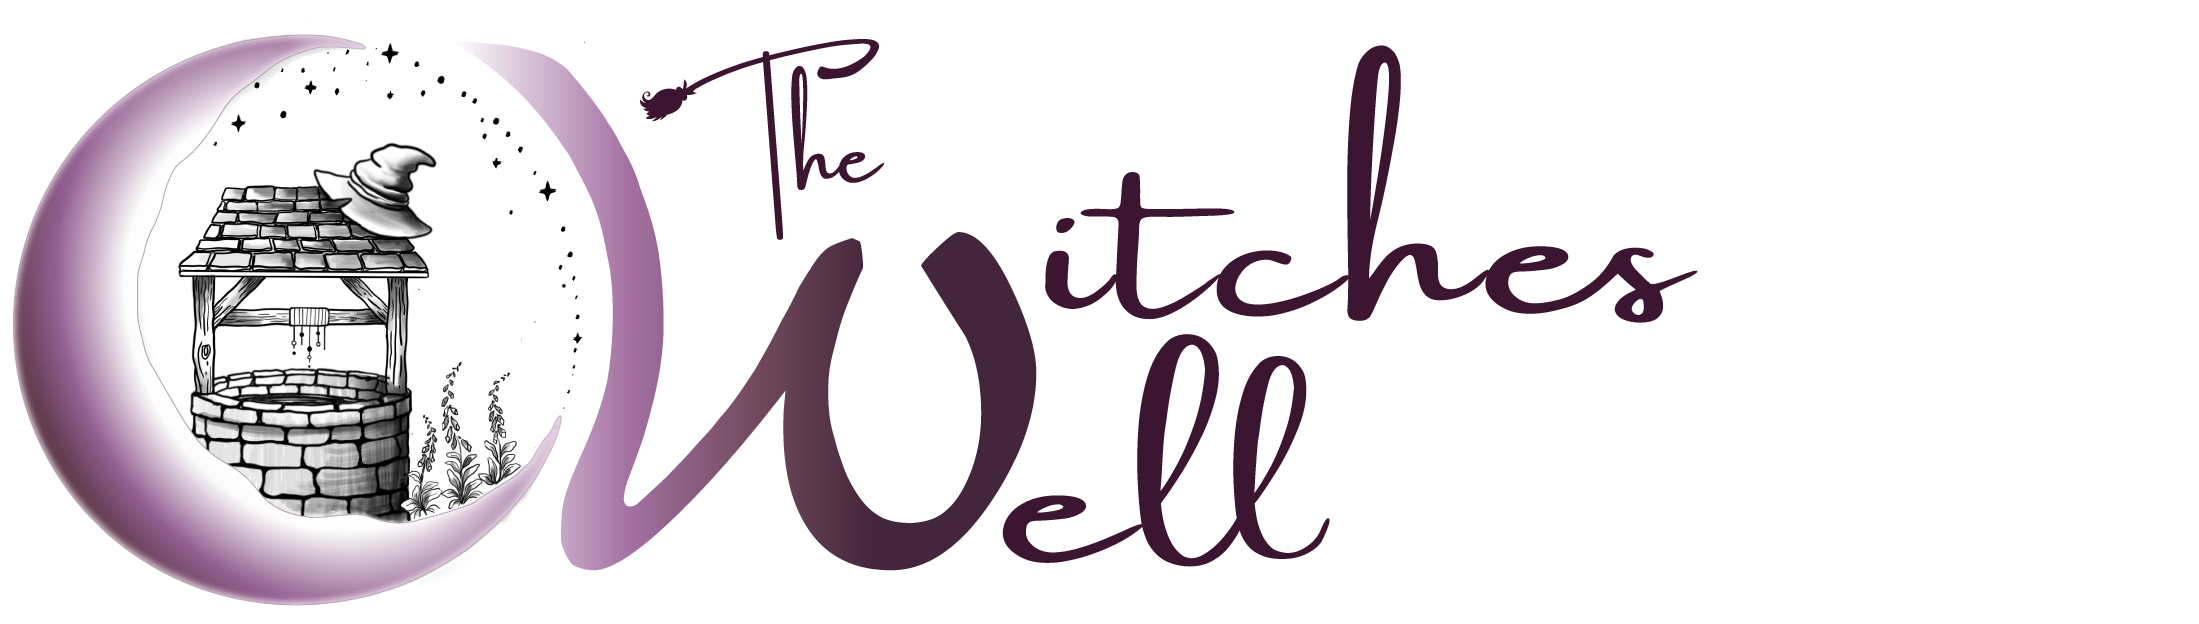 The Witches Well